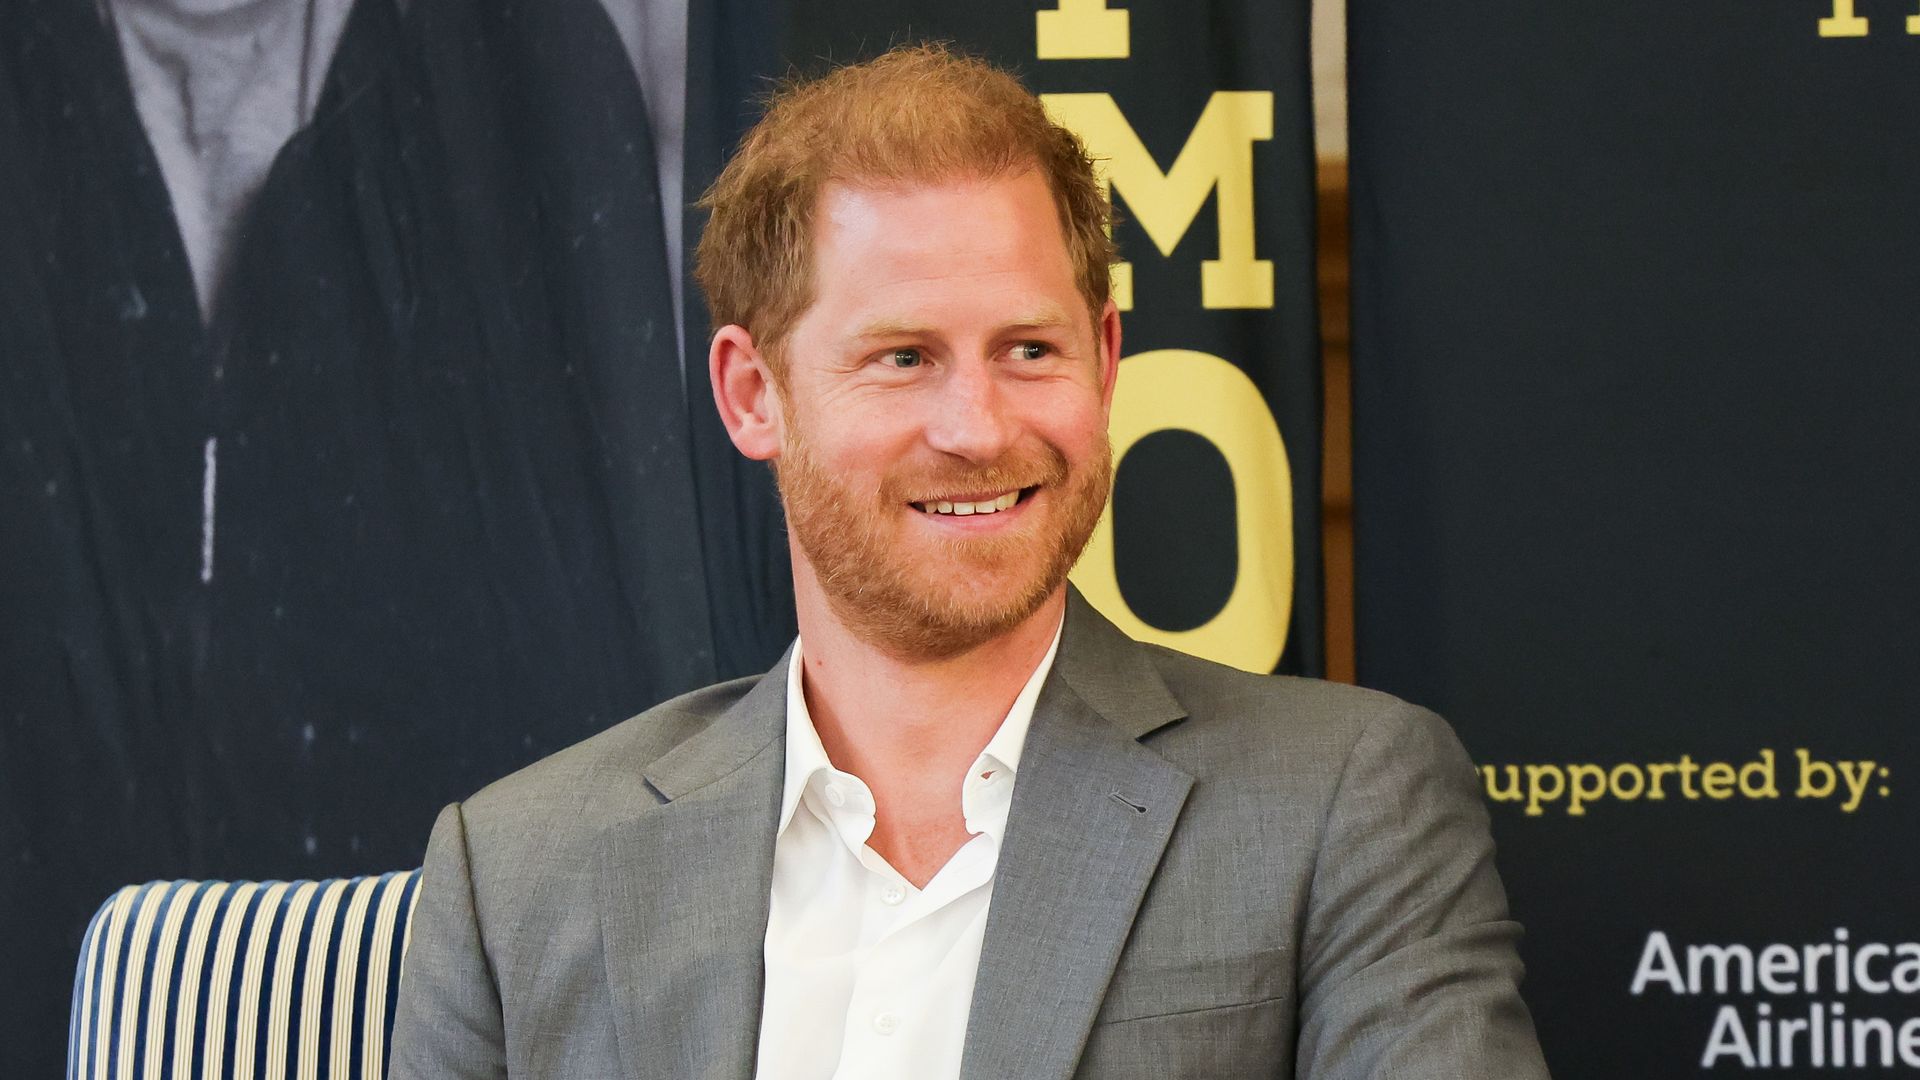 Prince Harry's wellness secret behind athletic new appearance revealed